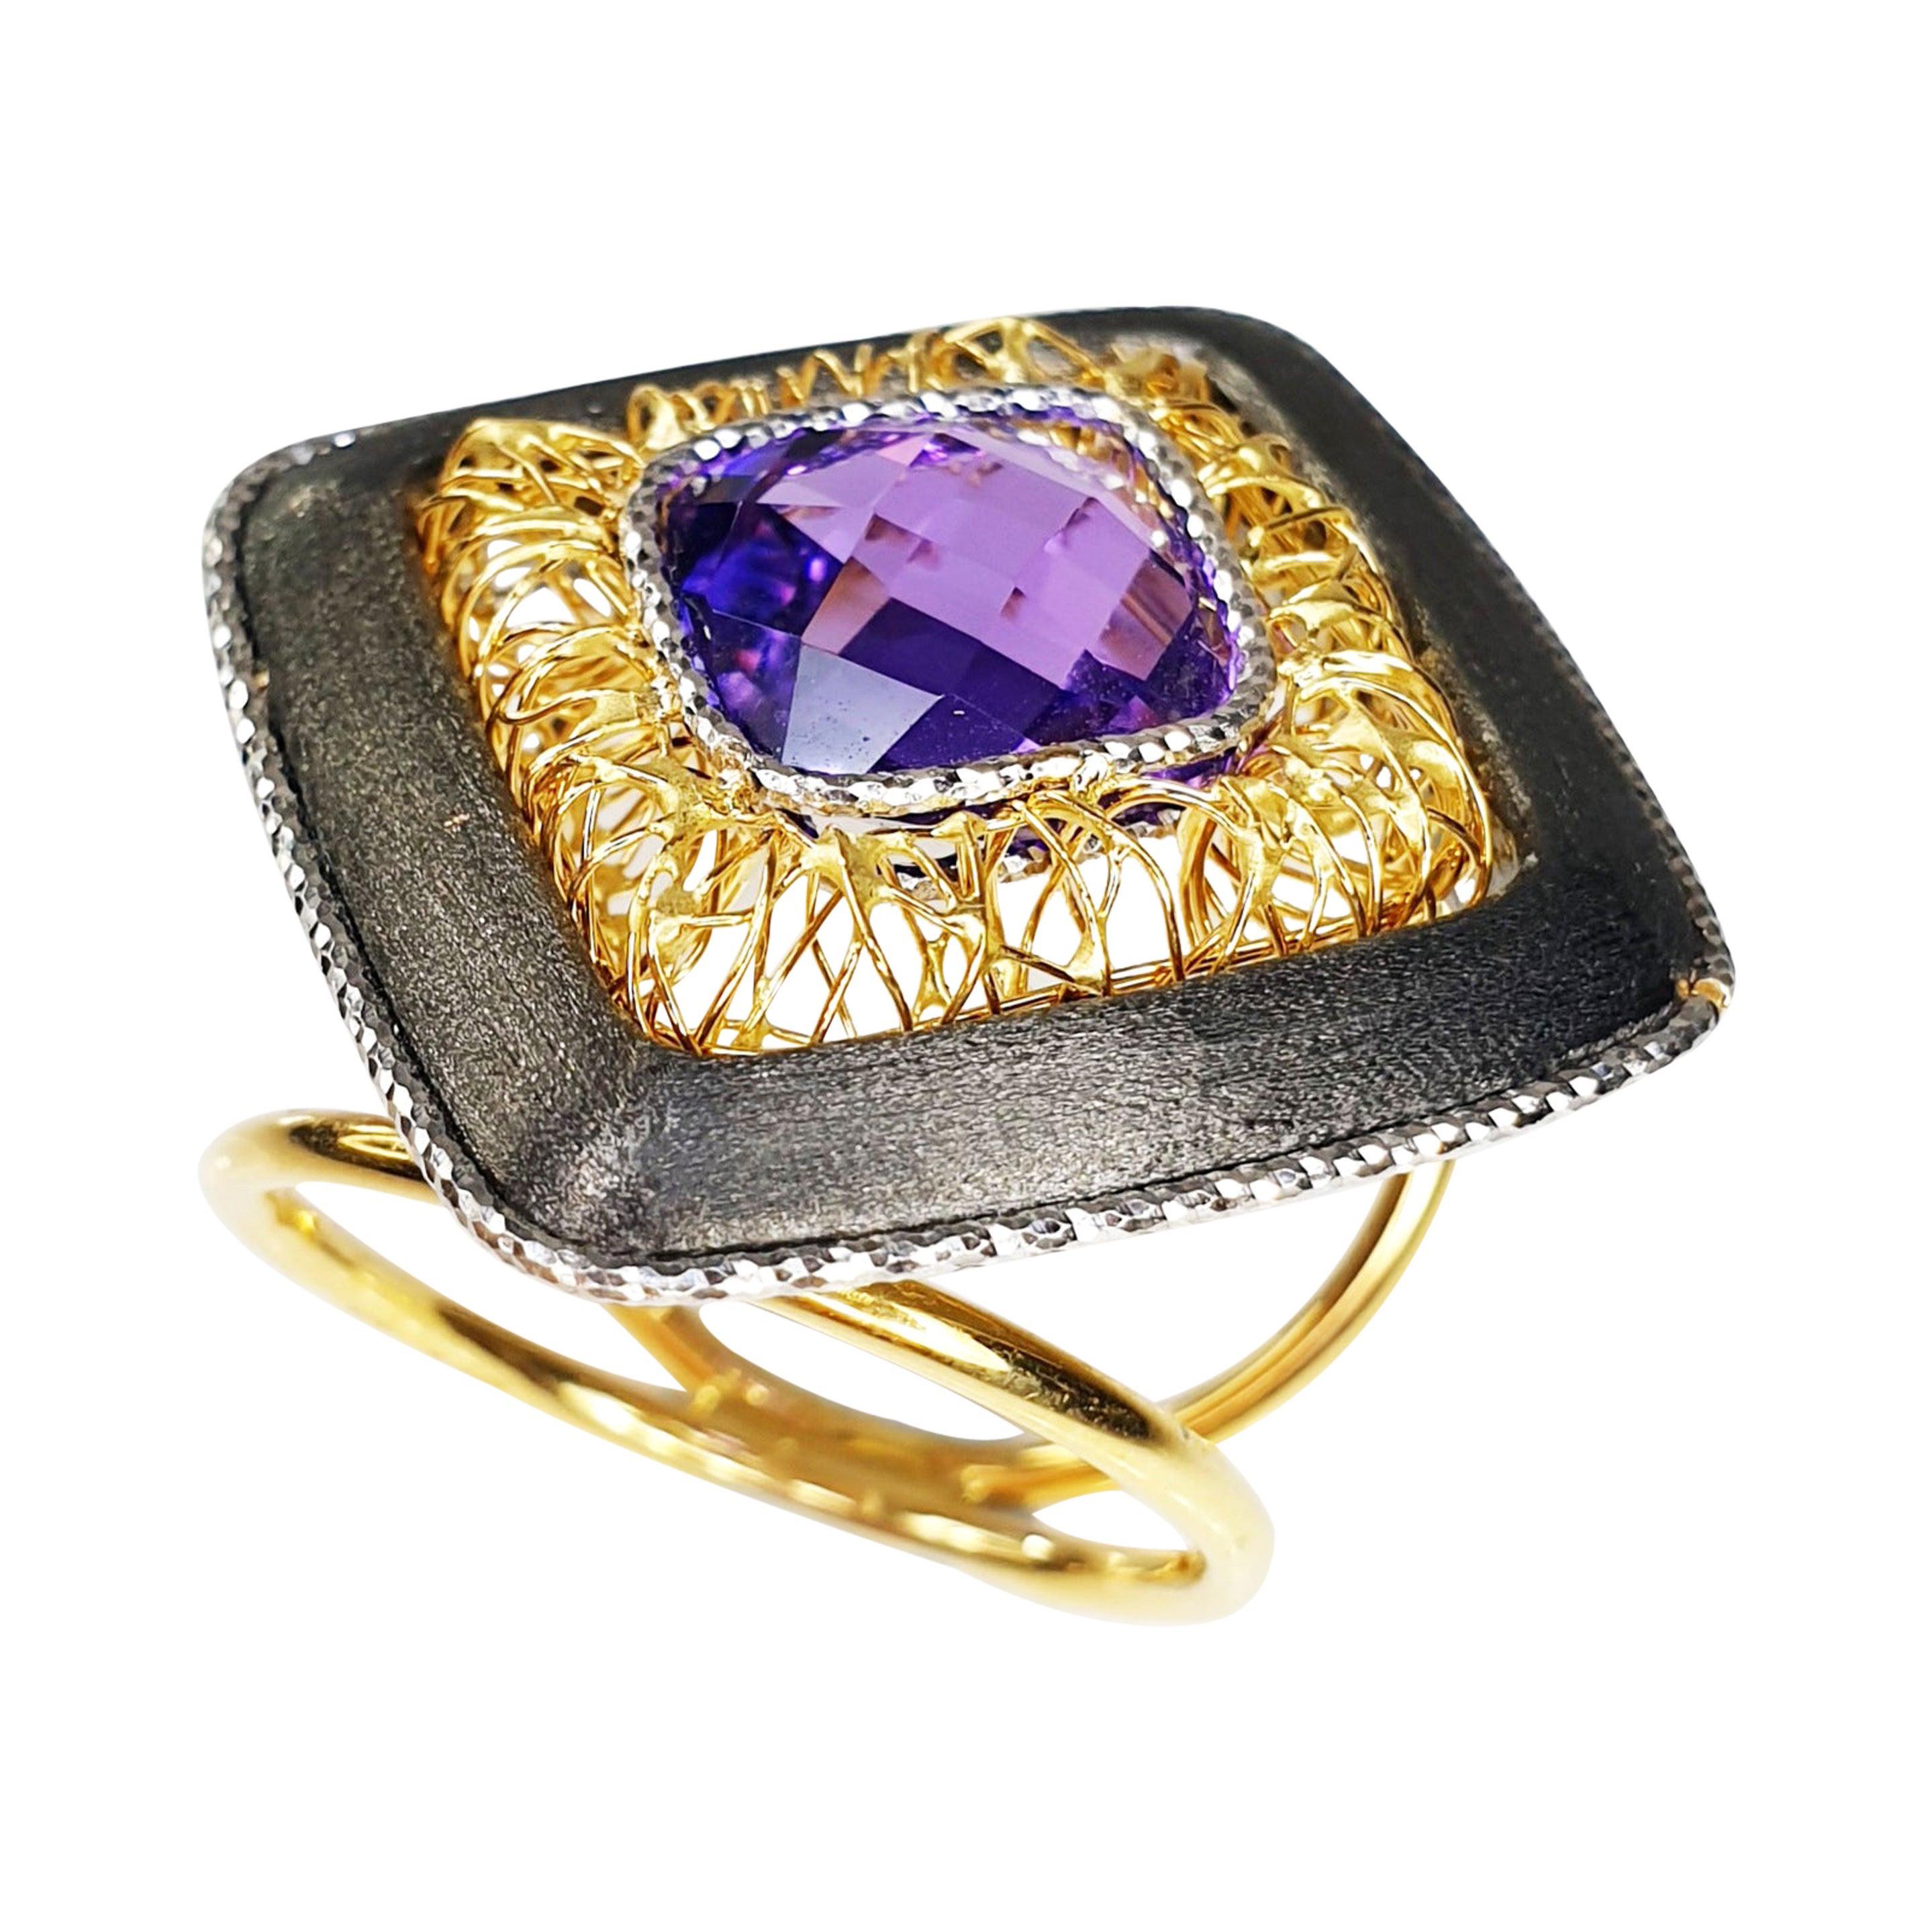 Multifaceted Amethyst in Titatium and 18 Karat White and Yellow Gold Ring